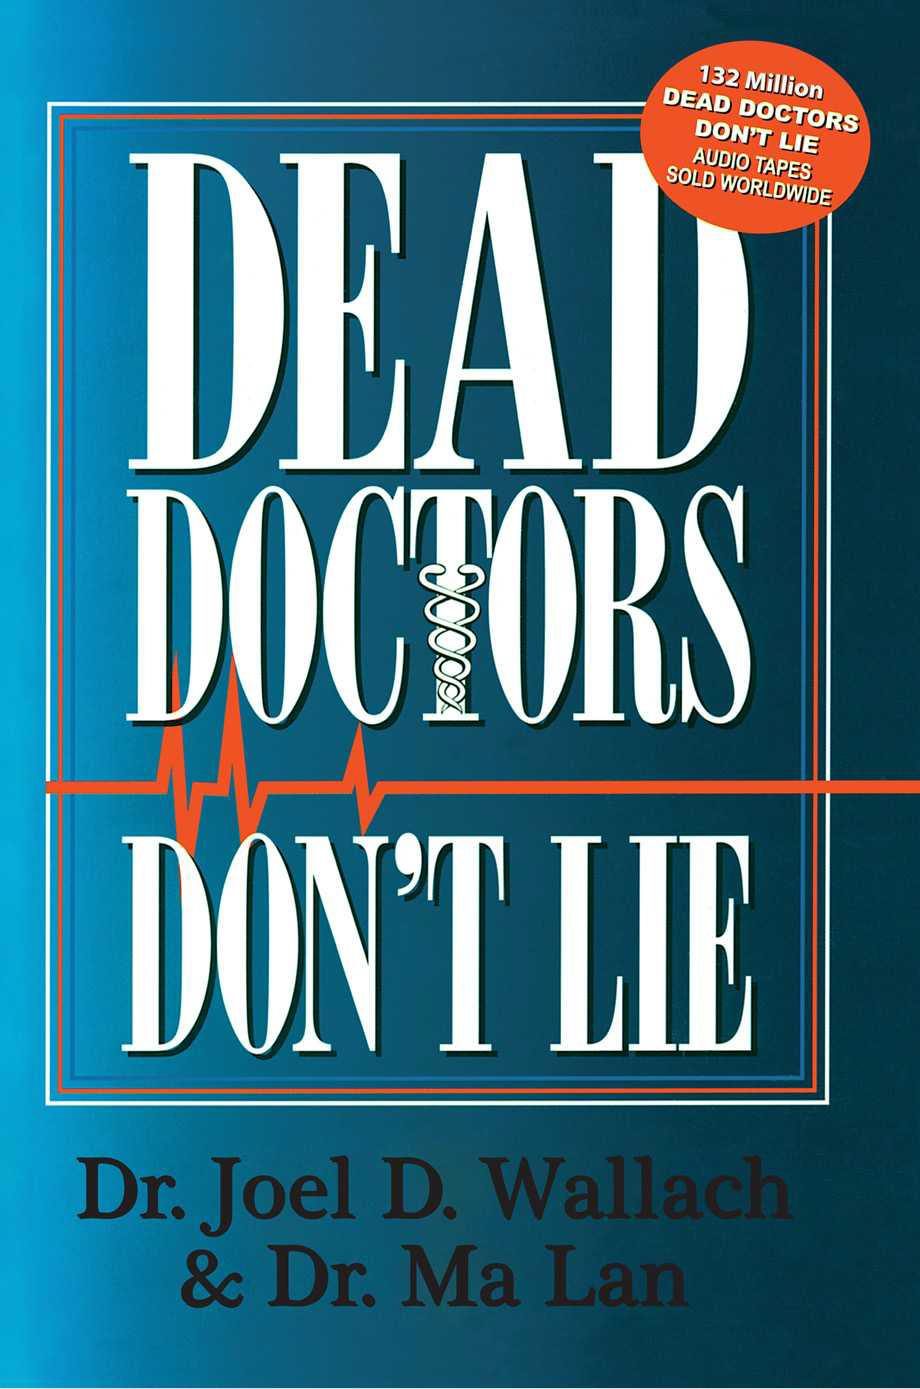 Dead Doctors Don't Lie by Dr. Joel Wallach and Dr. Ma Lan